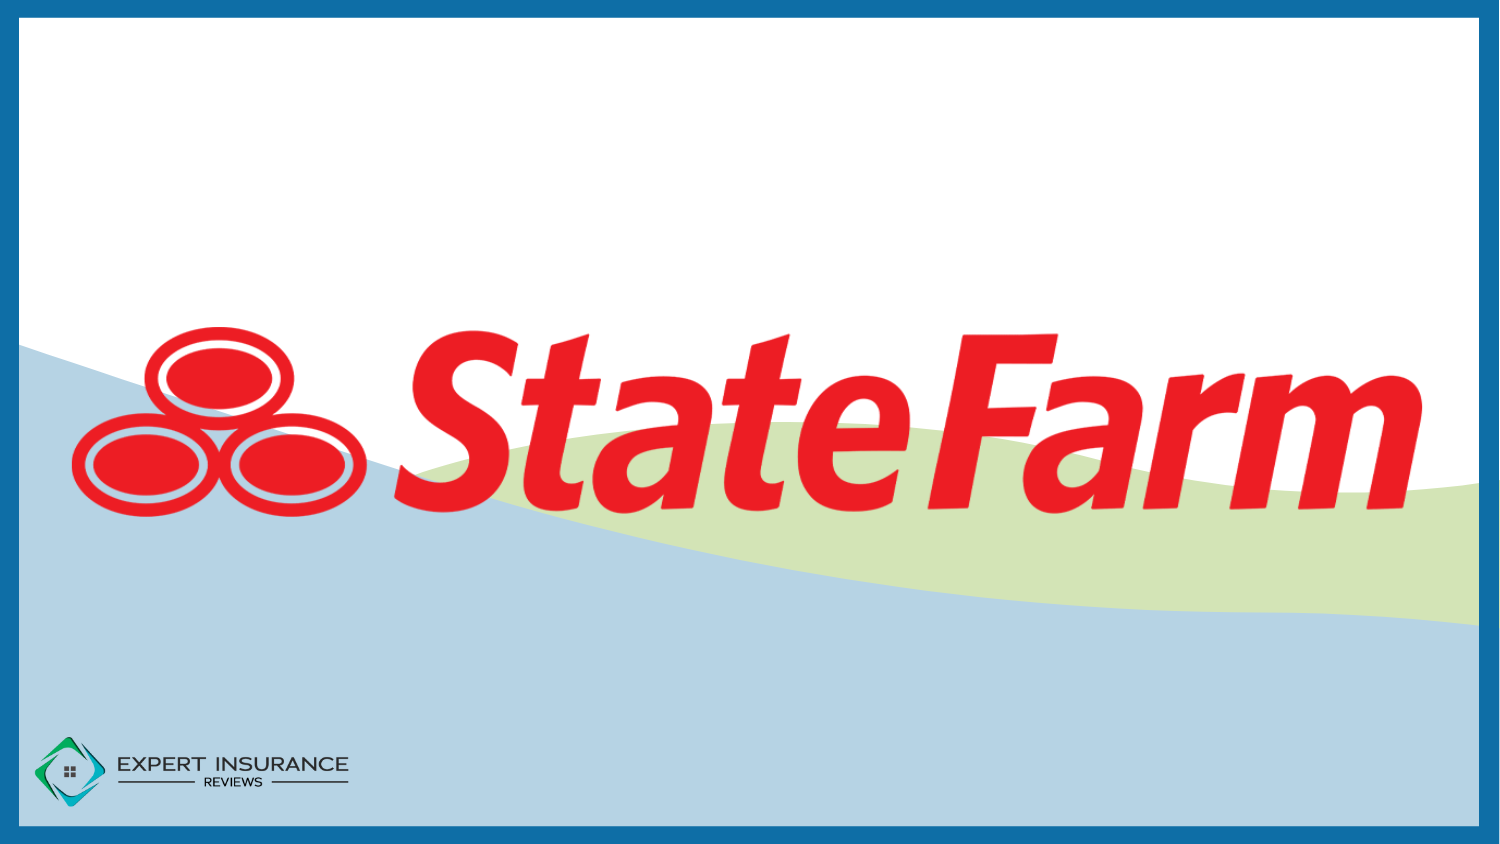 State Farm: best car insurance companies for Minis